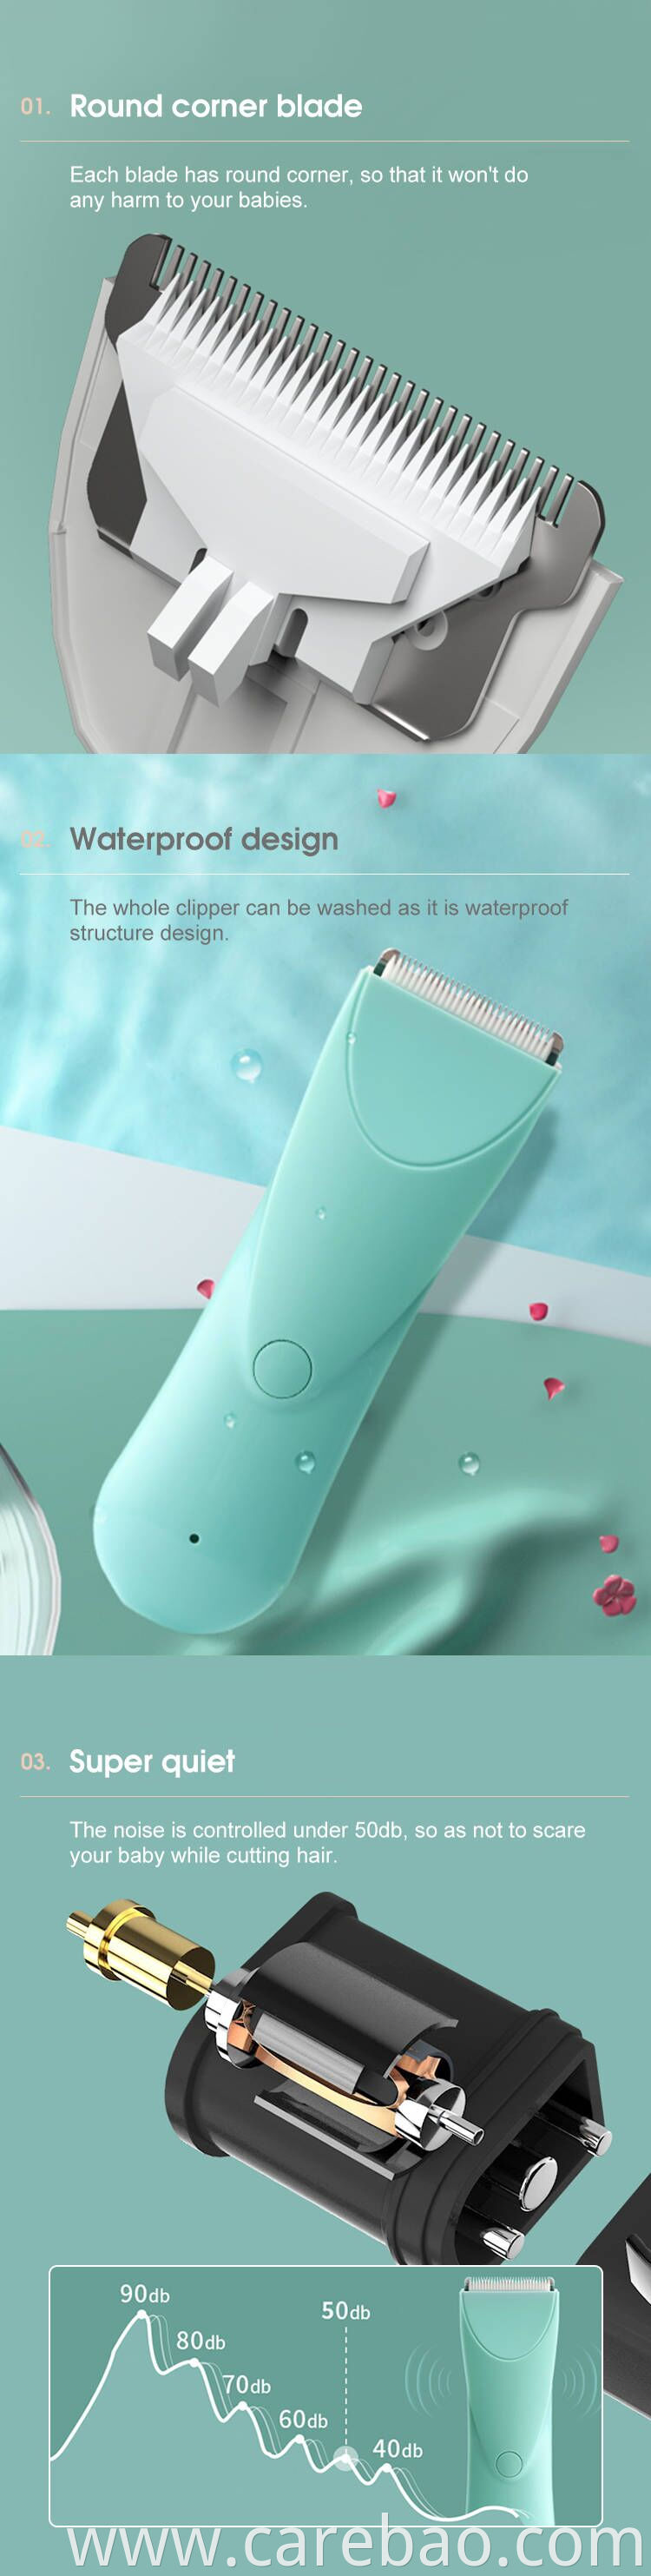 2022 Carebao Washable Electric Trimmer Body Hair Clipper For Baby Kids Children With Low Noise Vibration In Blue And Green